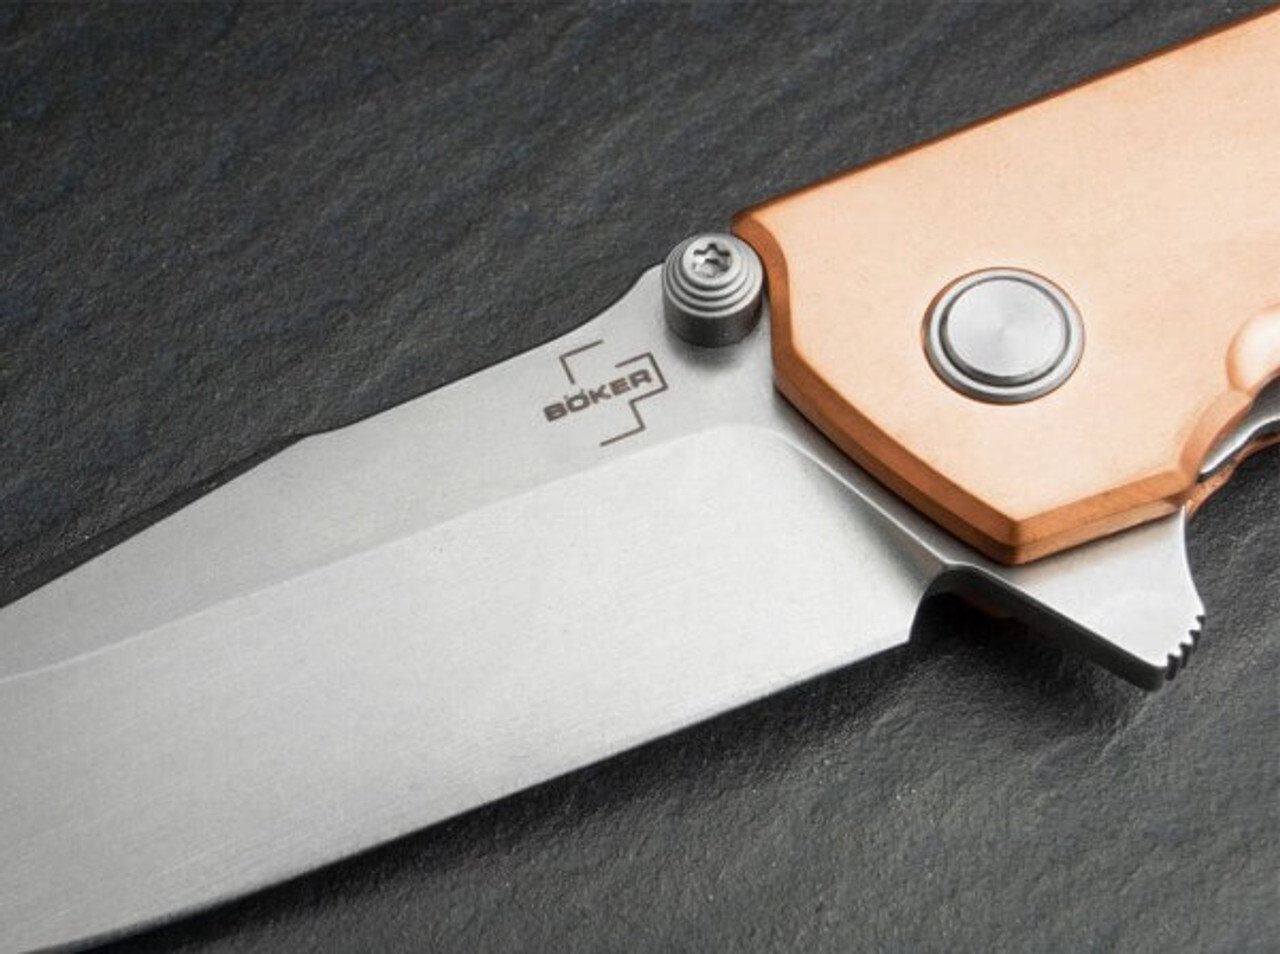 Boker Plus Kihon Assisted Copper